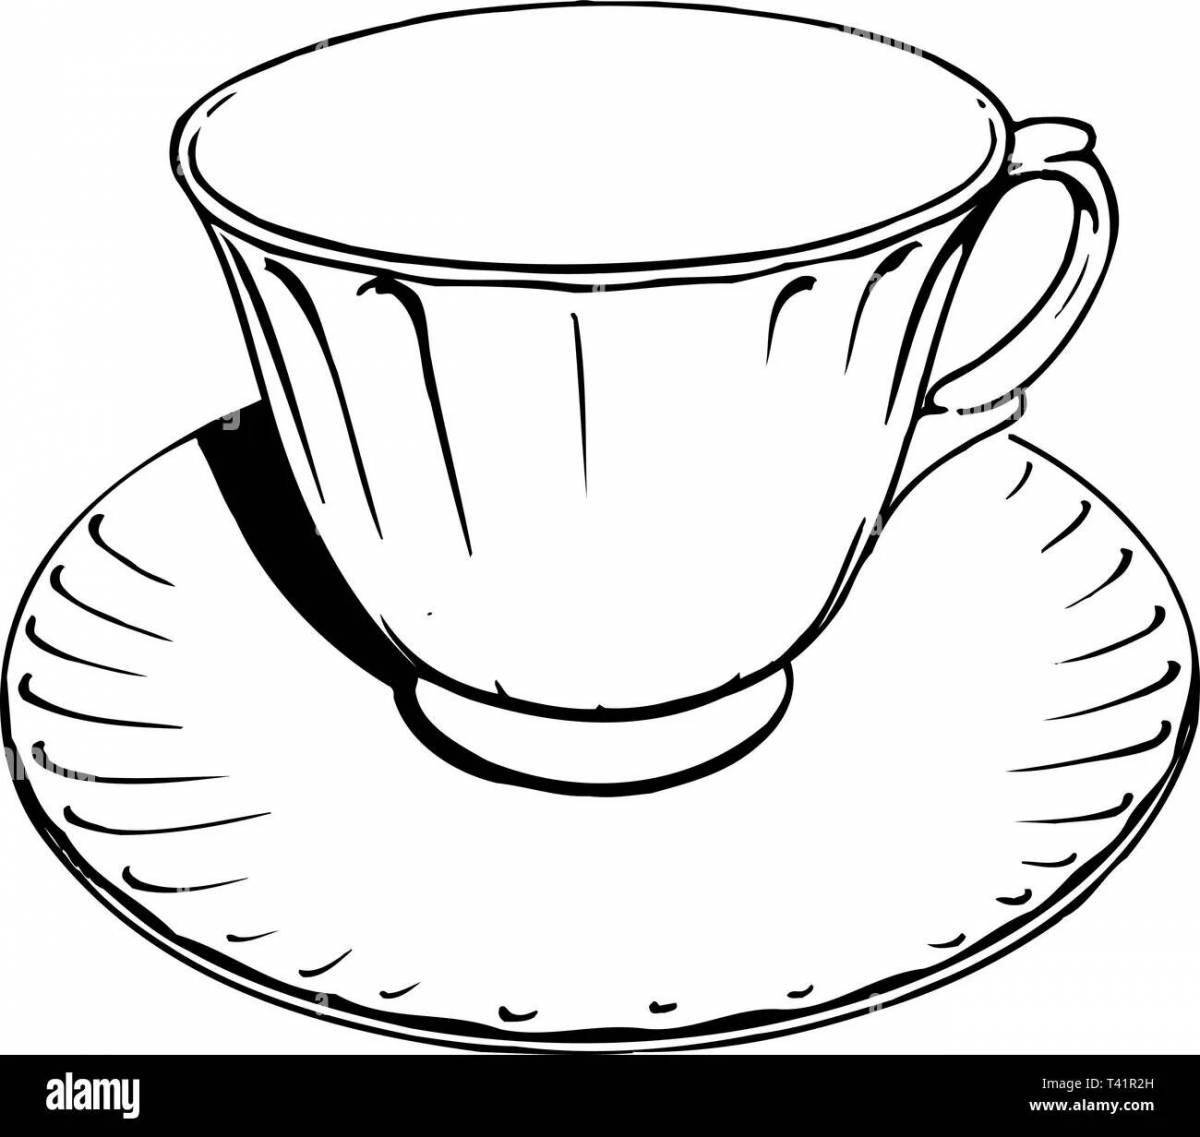 Outstanding beginner tea cup coloring page